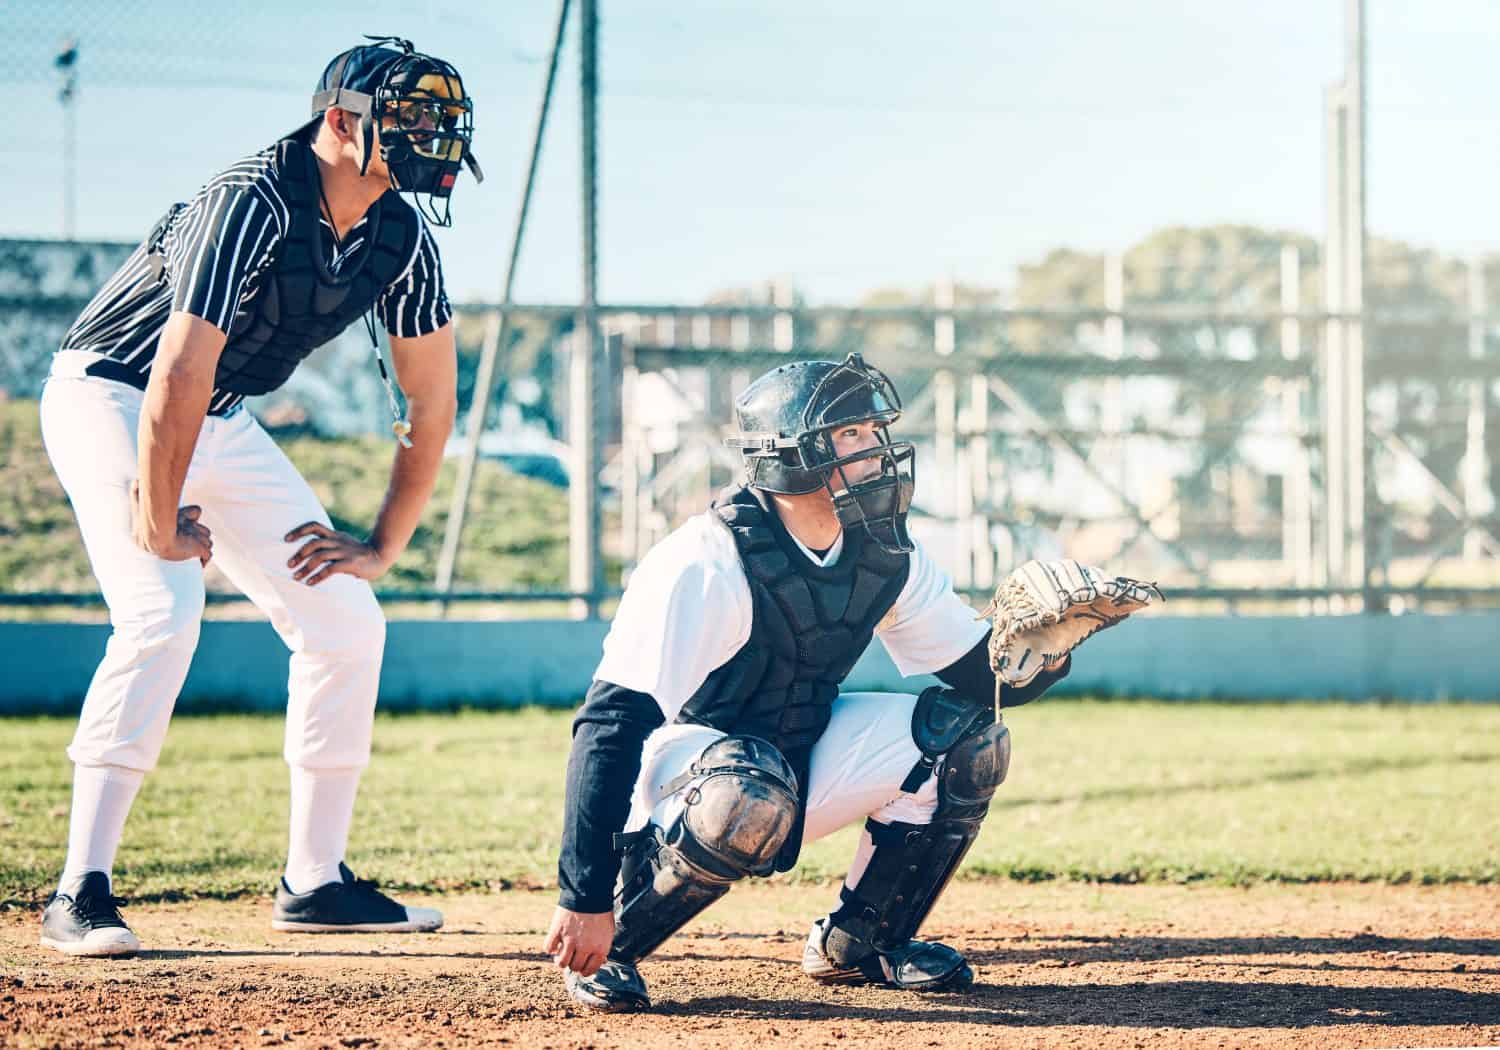 Sports, baseball and umpire with man on field for fitness, pitching and championship training. Workout, catcher and exercise with athlete playing at stadium for competition match, cardio and league